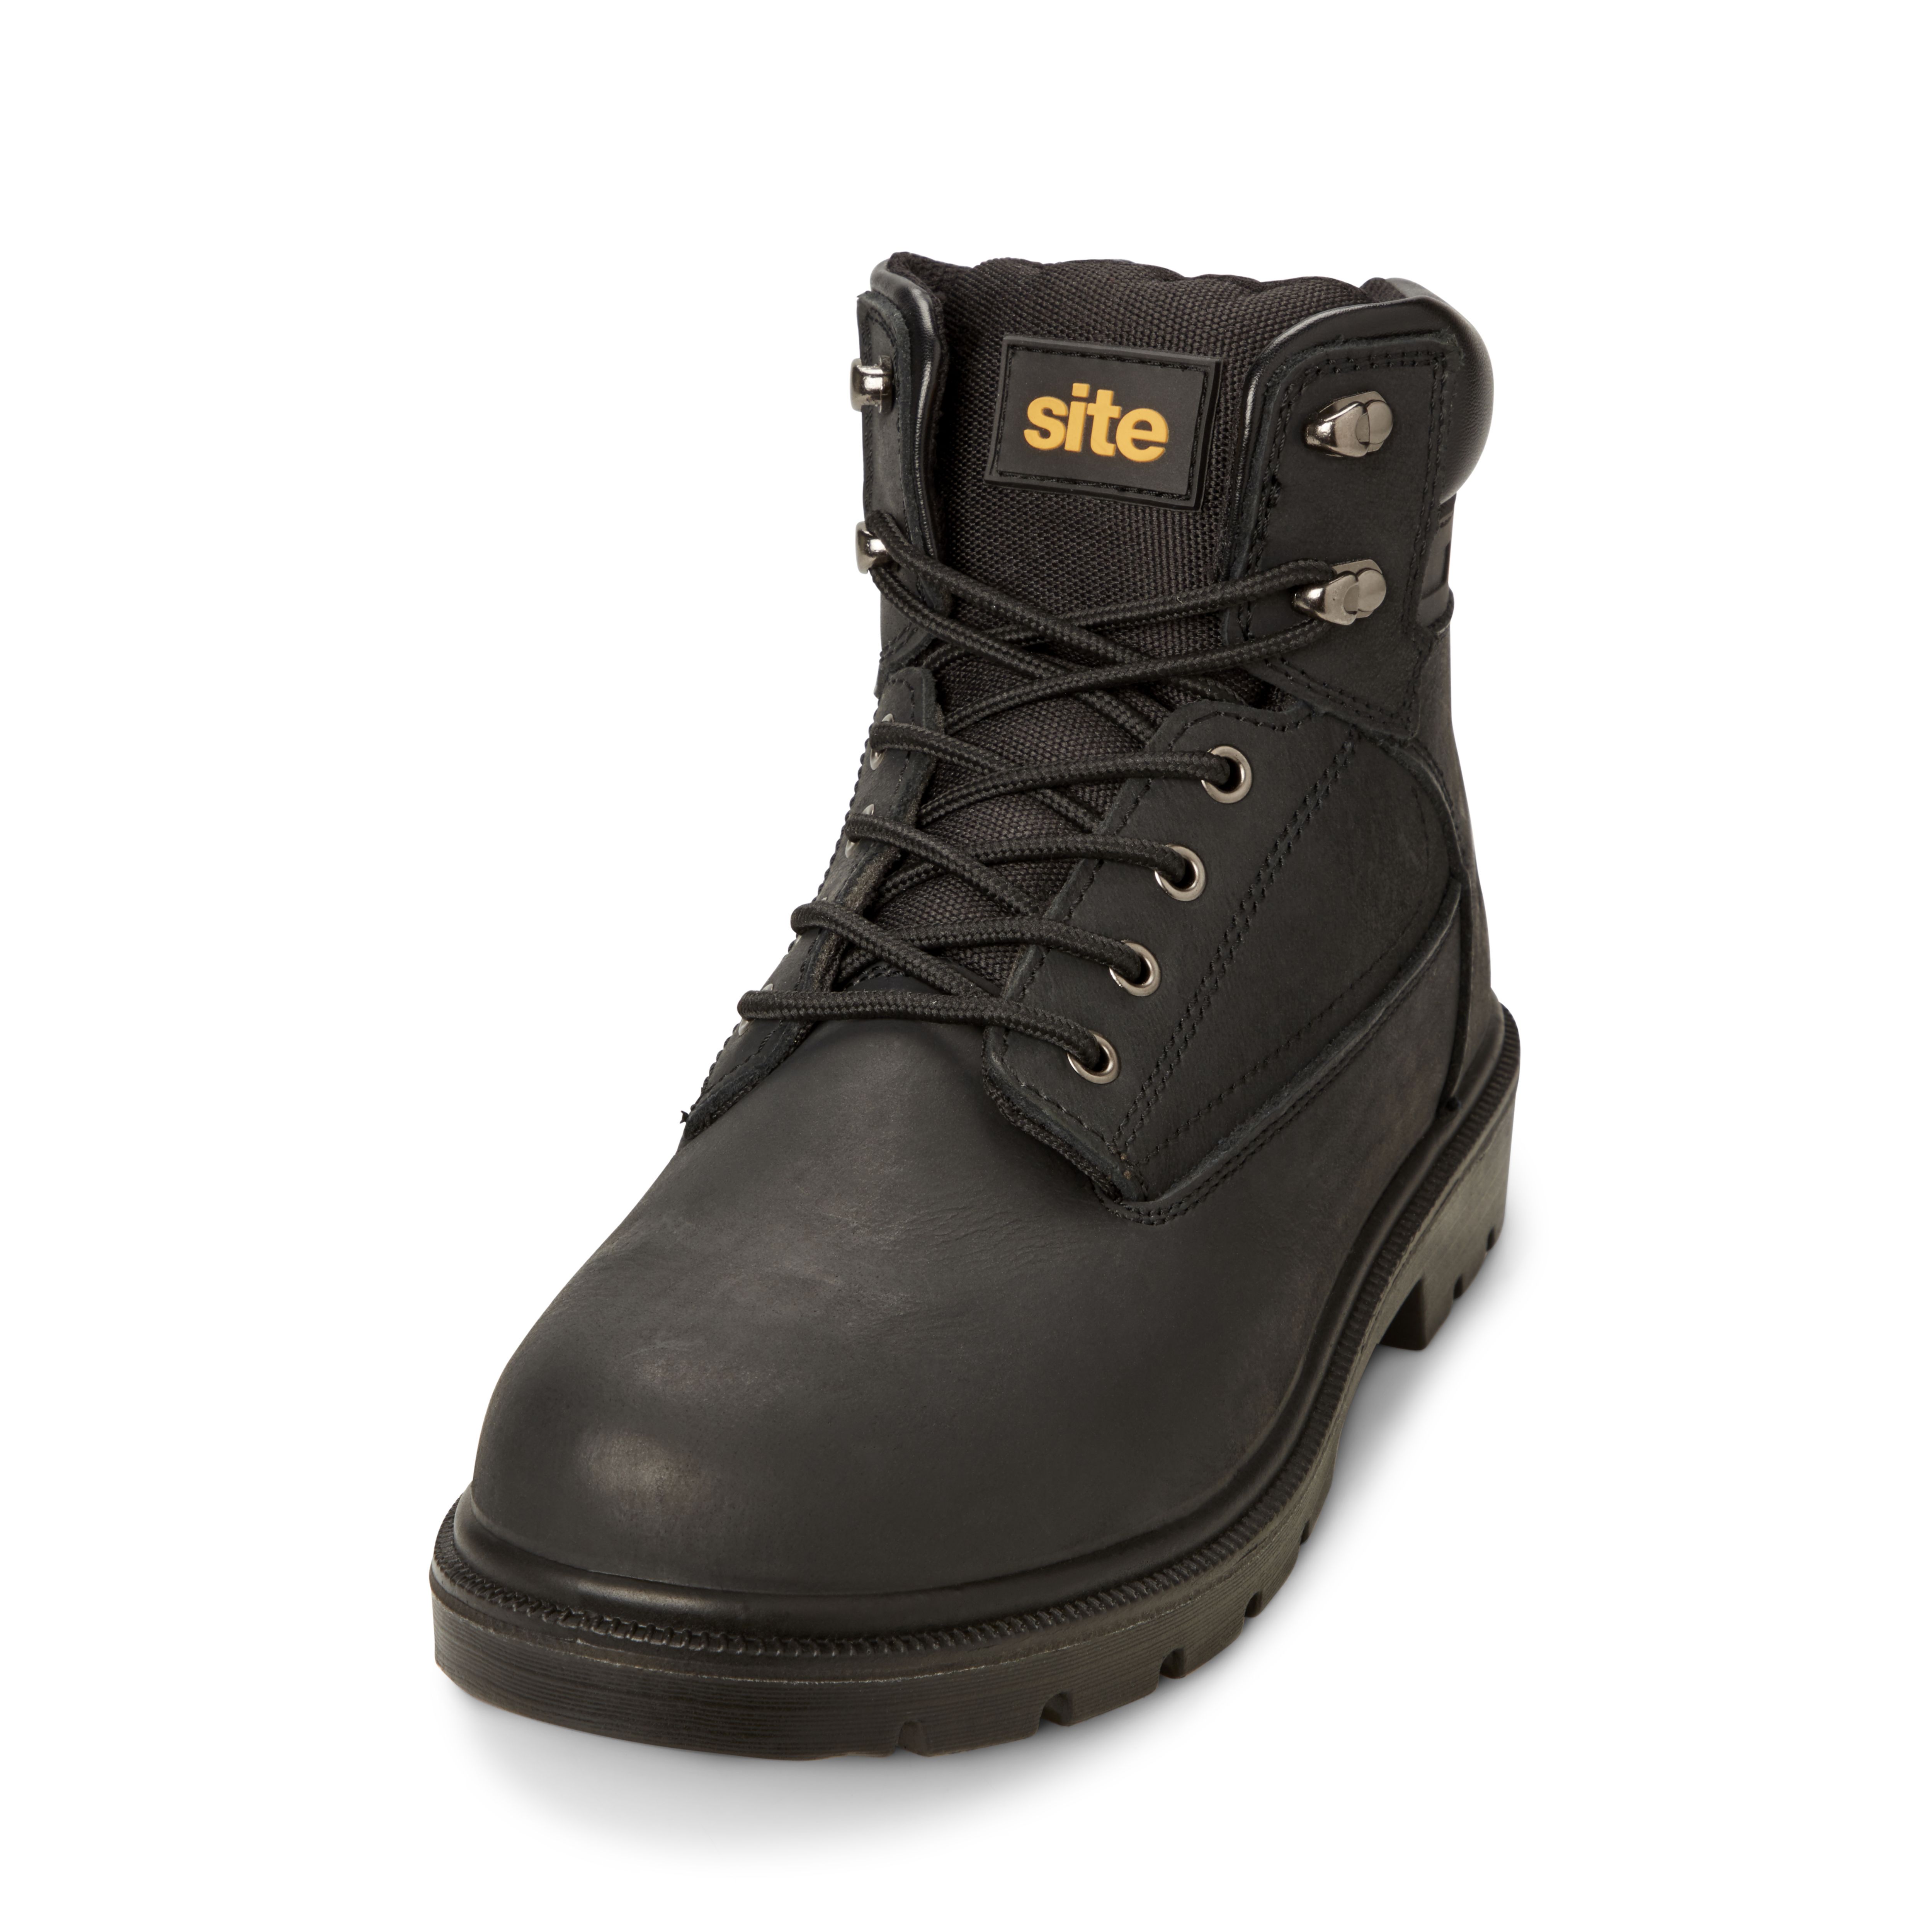 Marble Men's Black Safety boots, Size 9 